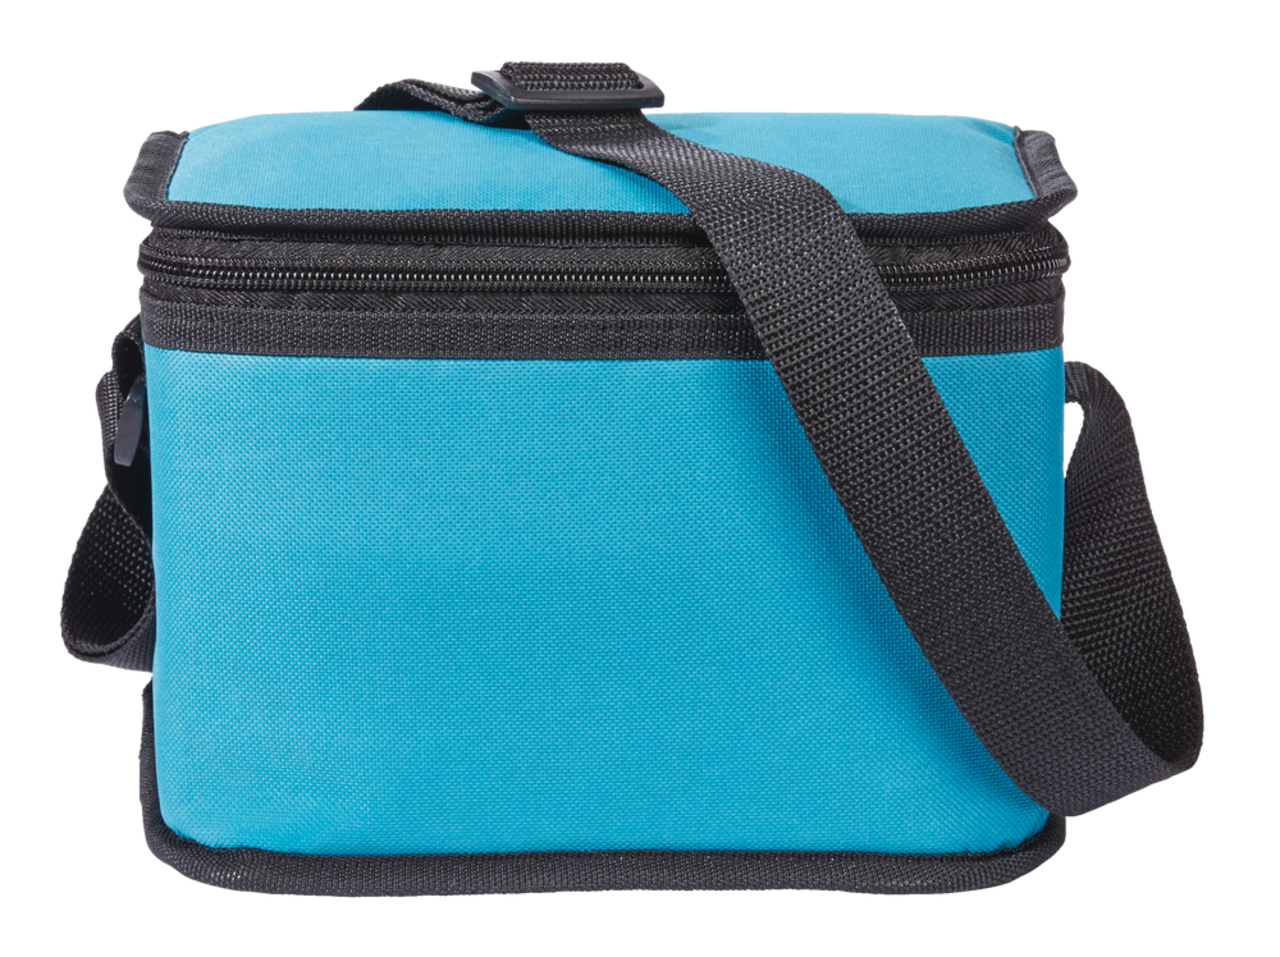 https://media-www.canadiantire.ca/product/living/kitchen/food-storage/1423814/mini-cooler-lunch-bag-a9888b3f-67c1-45d3-b881-16a1f463d336.png?imdensity=1&imwidth=640&impolicy=mZoom